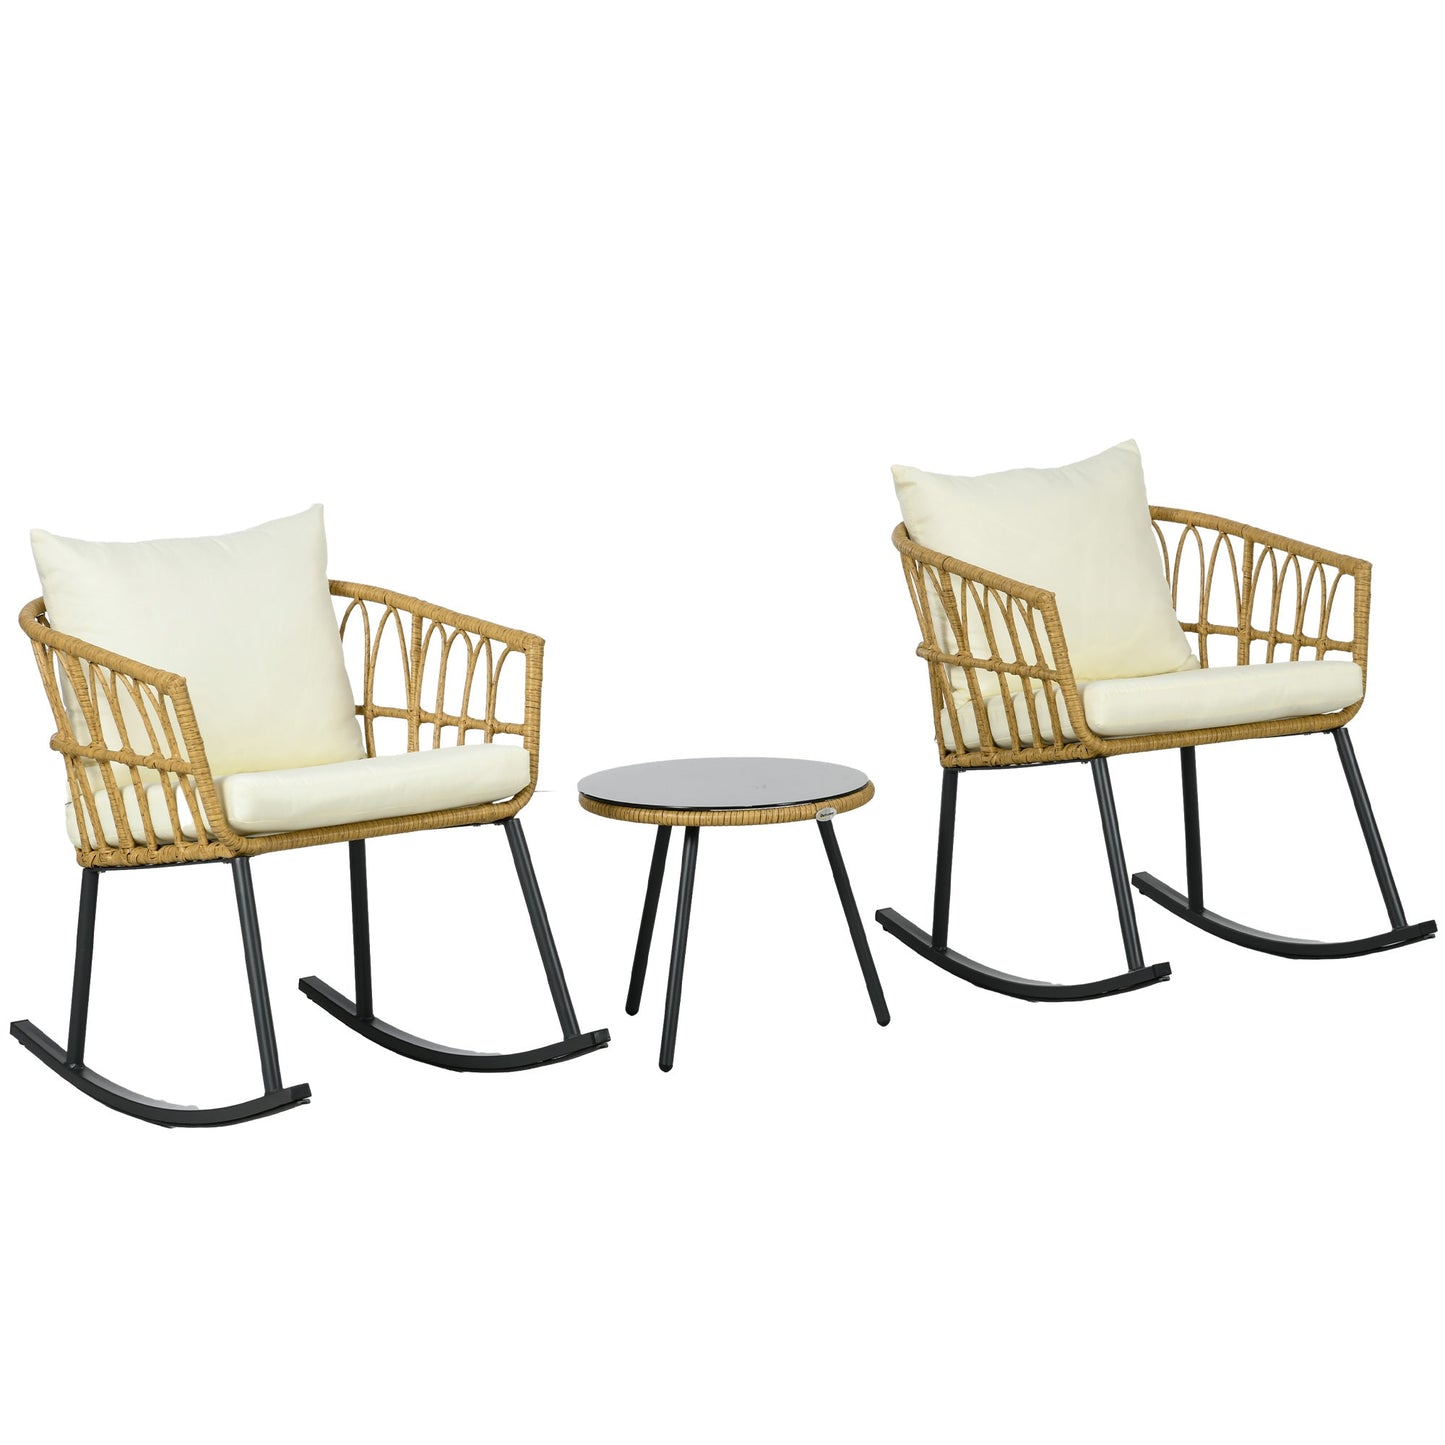 -Outsunny 3-Piece Patio Rocking Chair Set with Cushions, Outdoor PE Rattan Wicker Bistro Set with 2 Rocker Chairs, Patio Conversation Set, Cream White - Outdoor Style Company